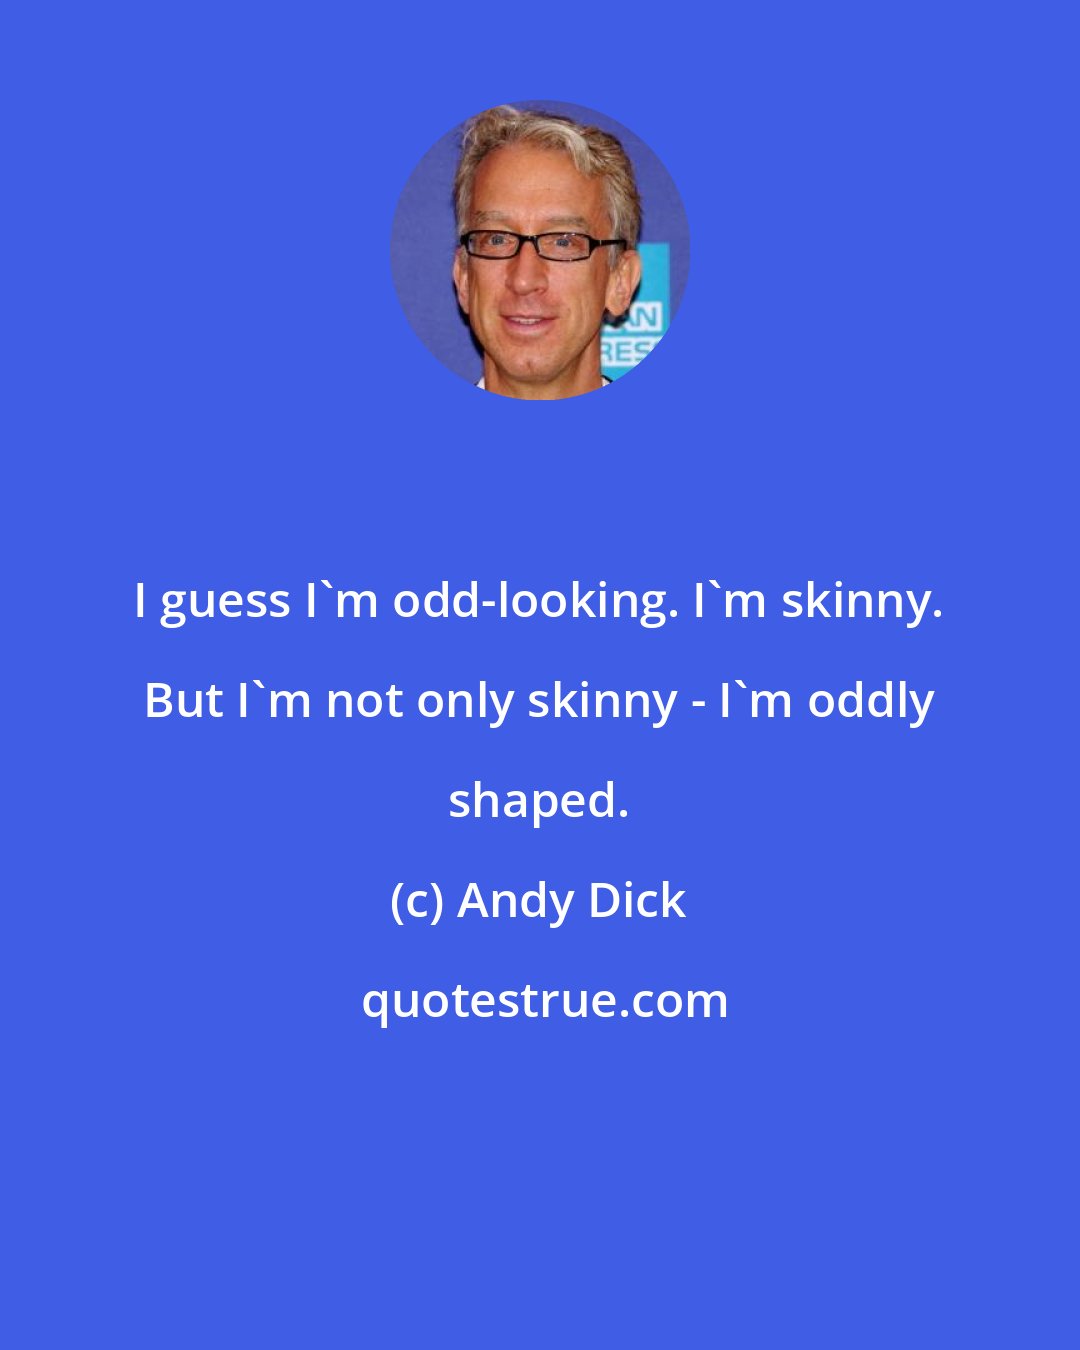 Andy Dick: I guess I'm odd-looking. I'm skinny. But I'm not only skinny - I'm oddly shaped.